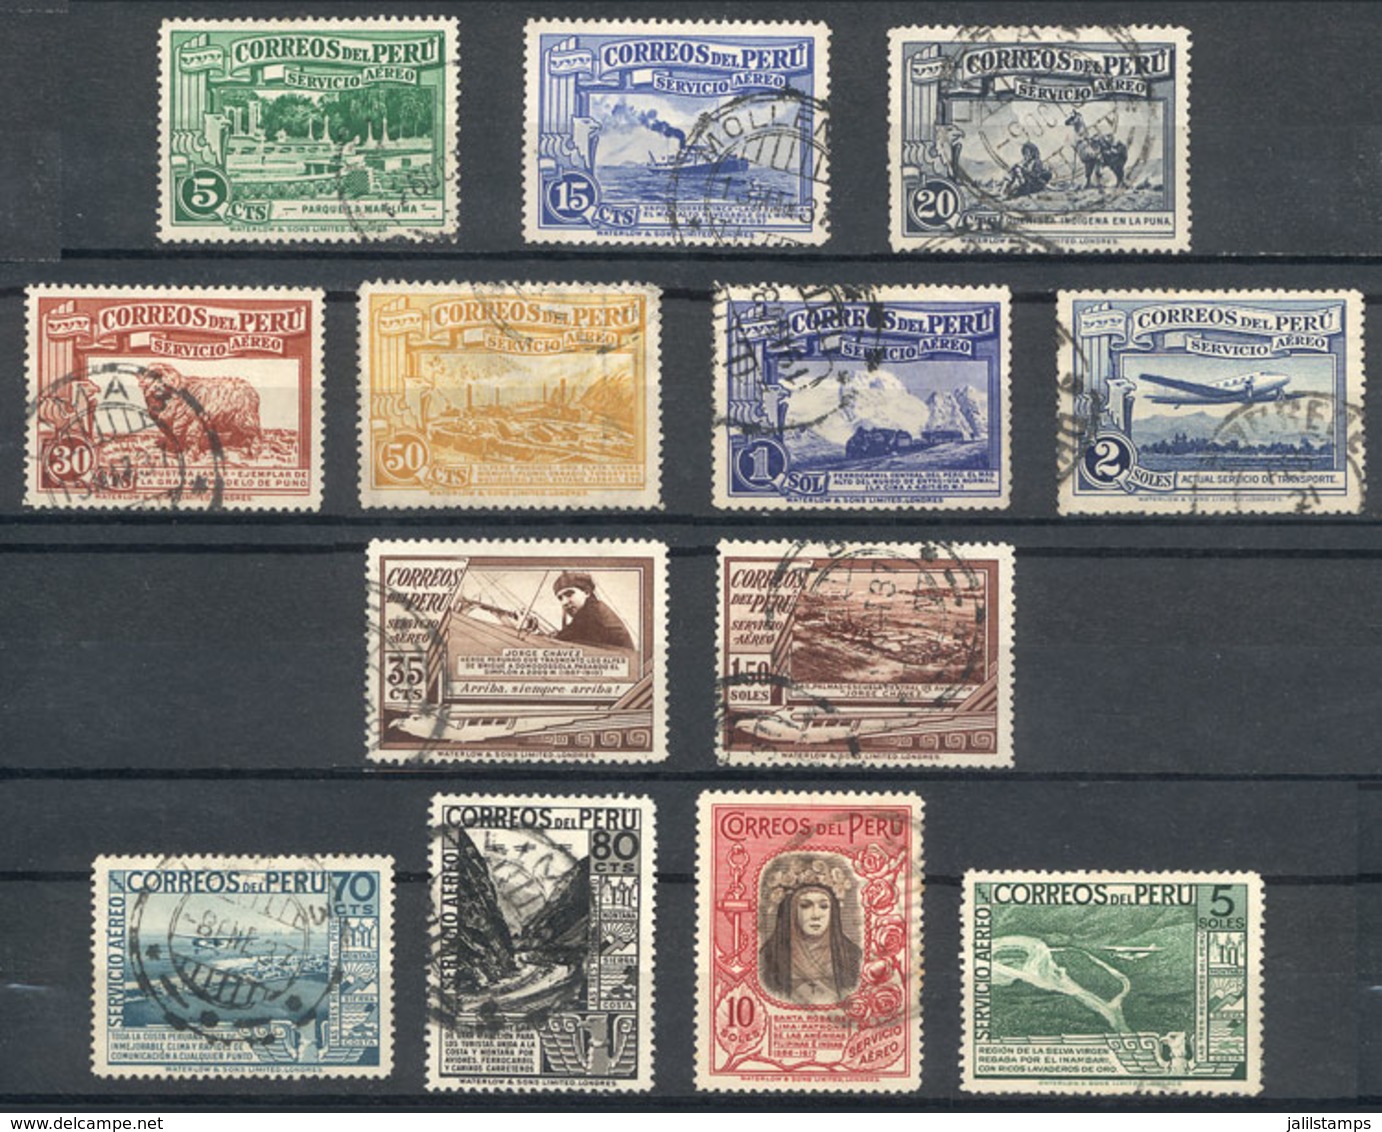 PERU: Sc.C16 + Other Values (Yvert 16/28), 1936 Complete Set Of 13 Used Values, Fine To Very Fine Quality, Yvert Catalog - Peru